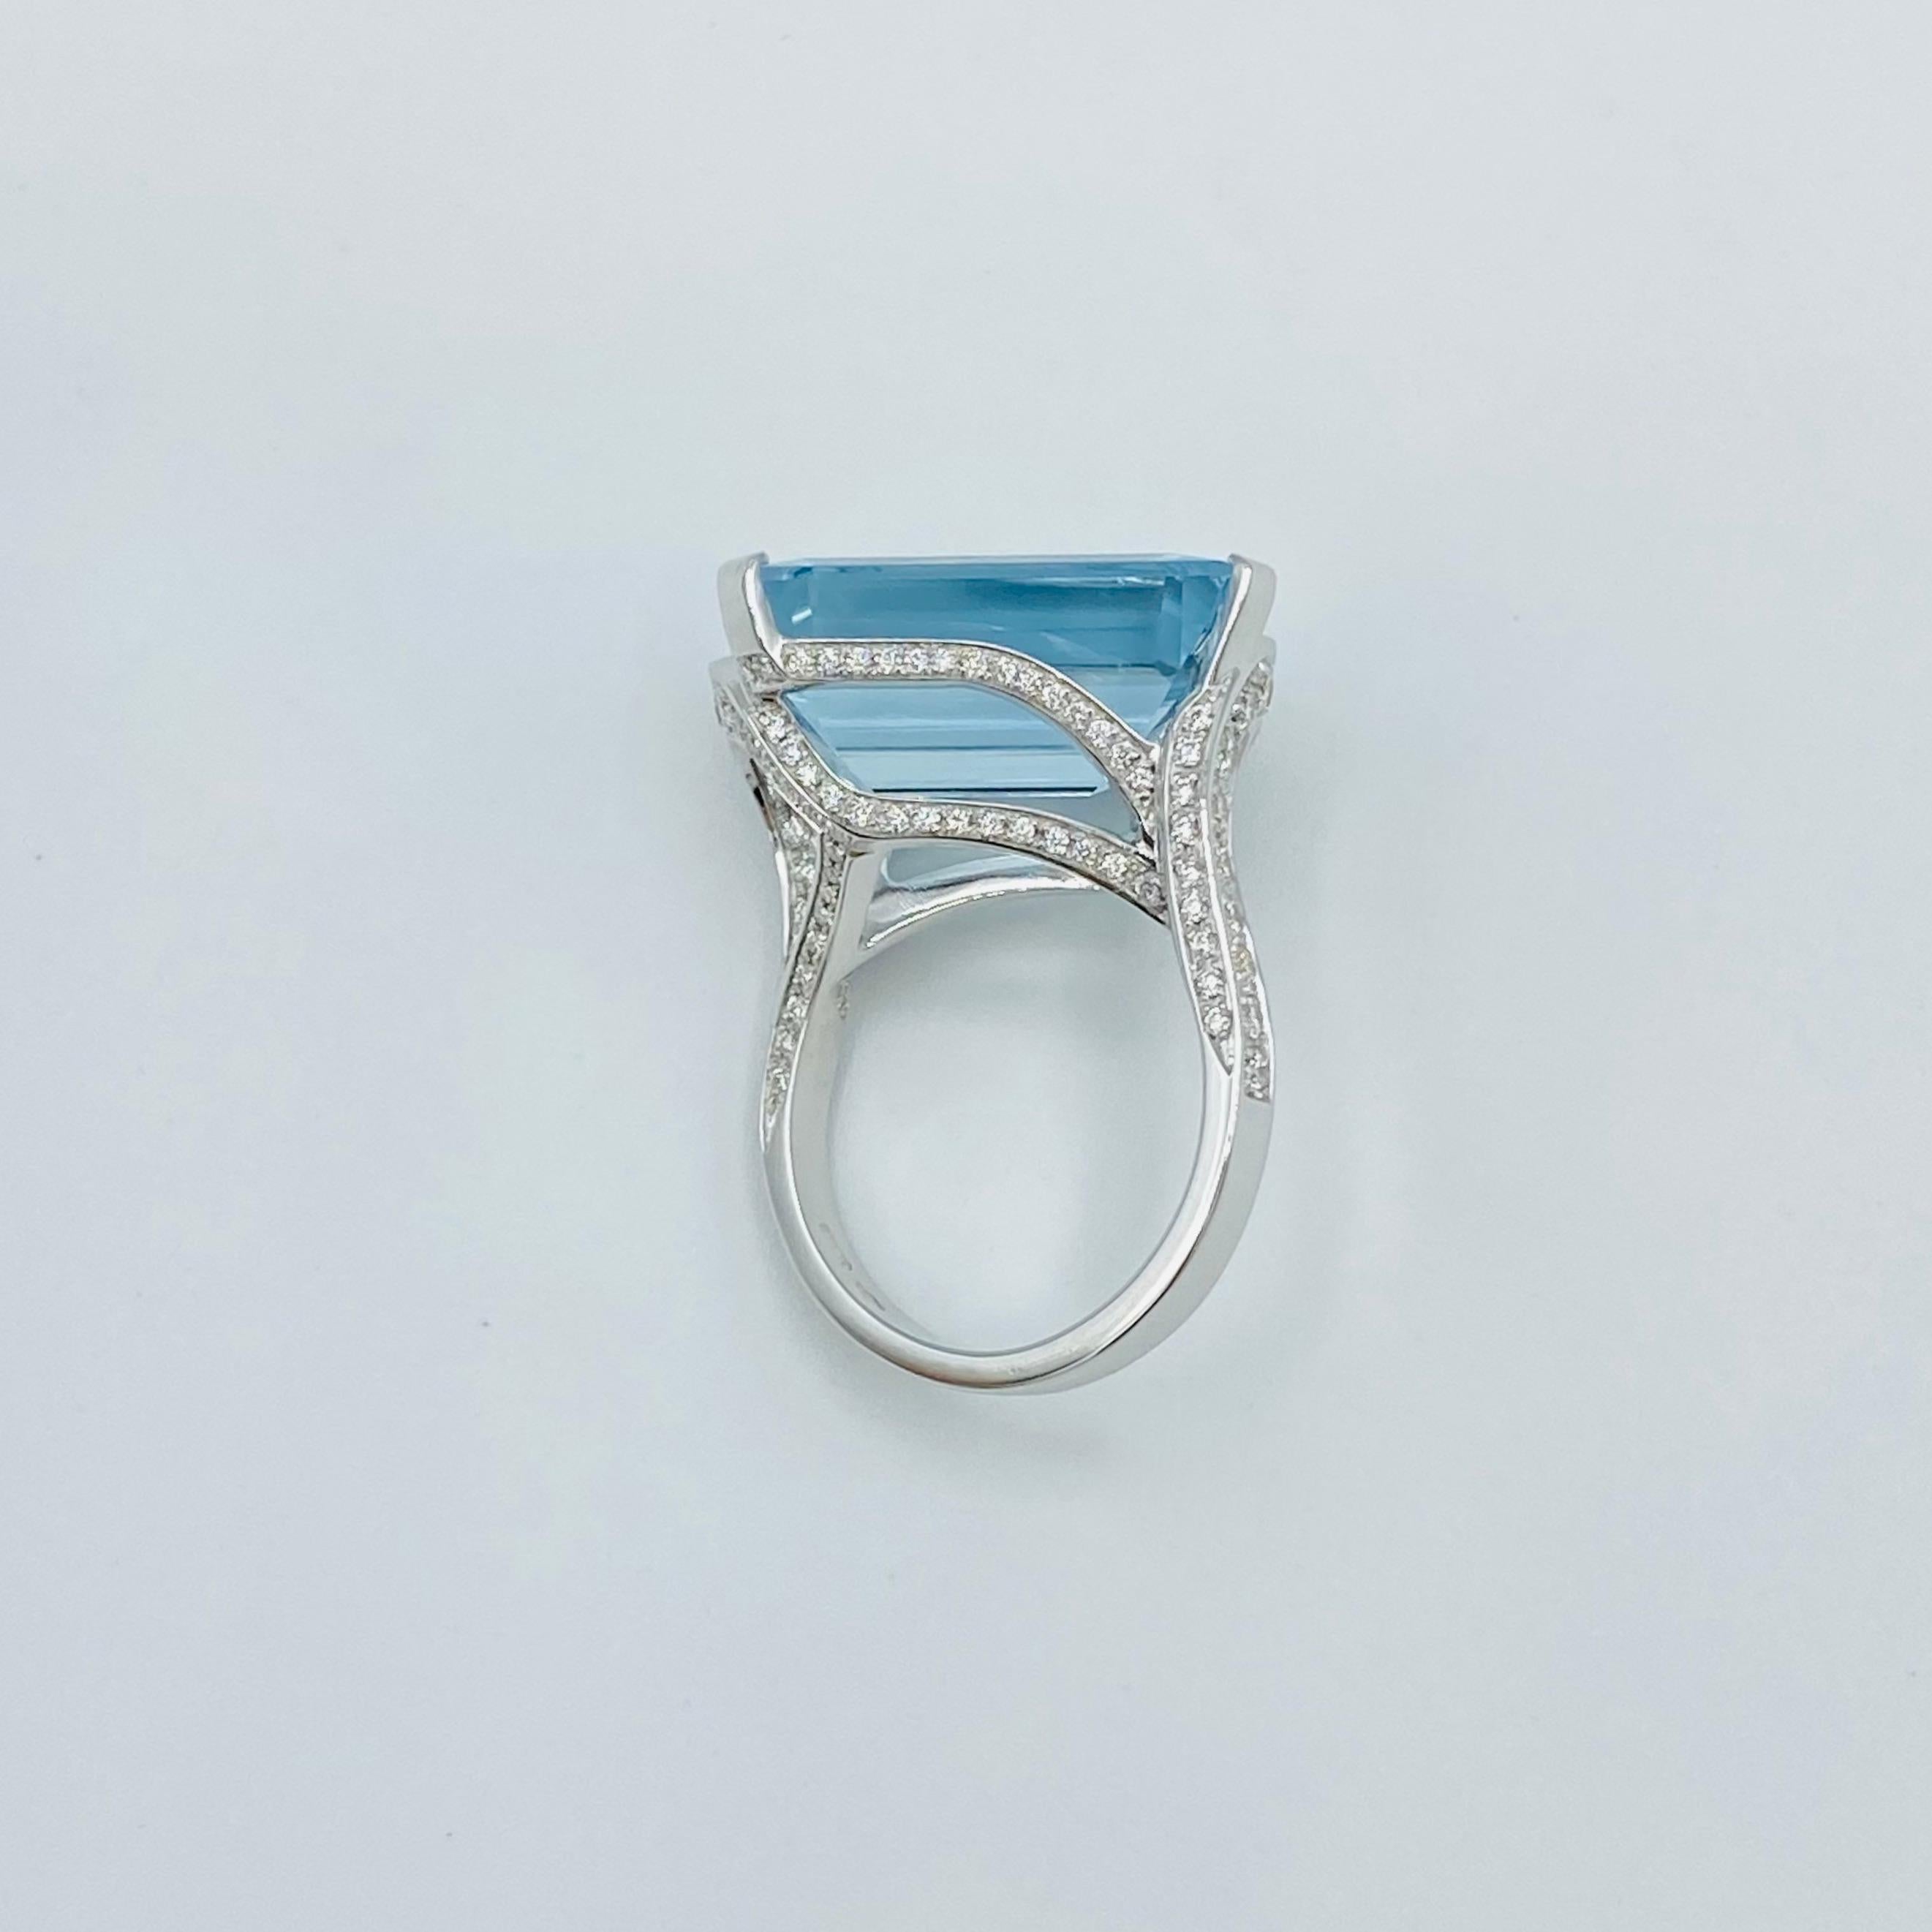 Ct 13.17 Aquamarine White Diamond Cocktail 18Kt Gold Made in Italy Ring In New Condition For Sale In Bussolengo, Verona